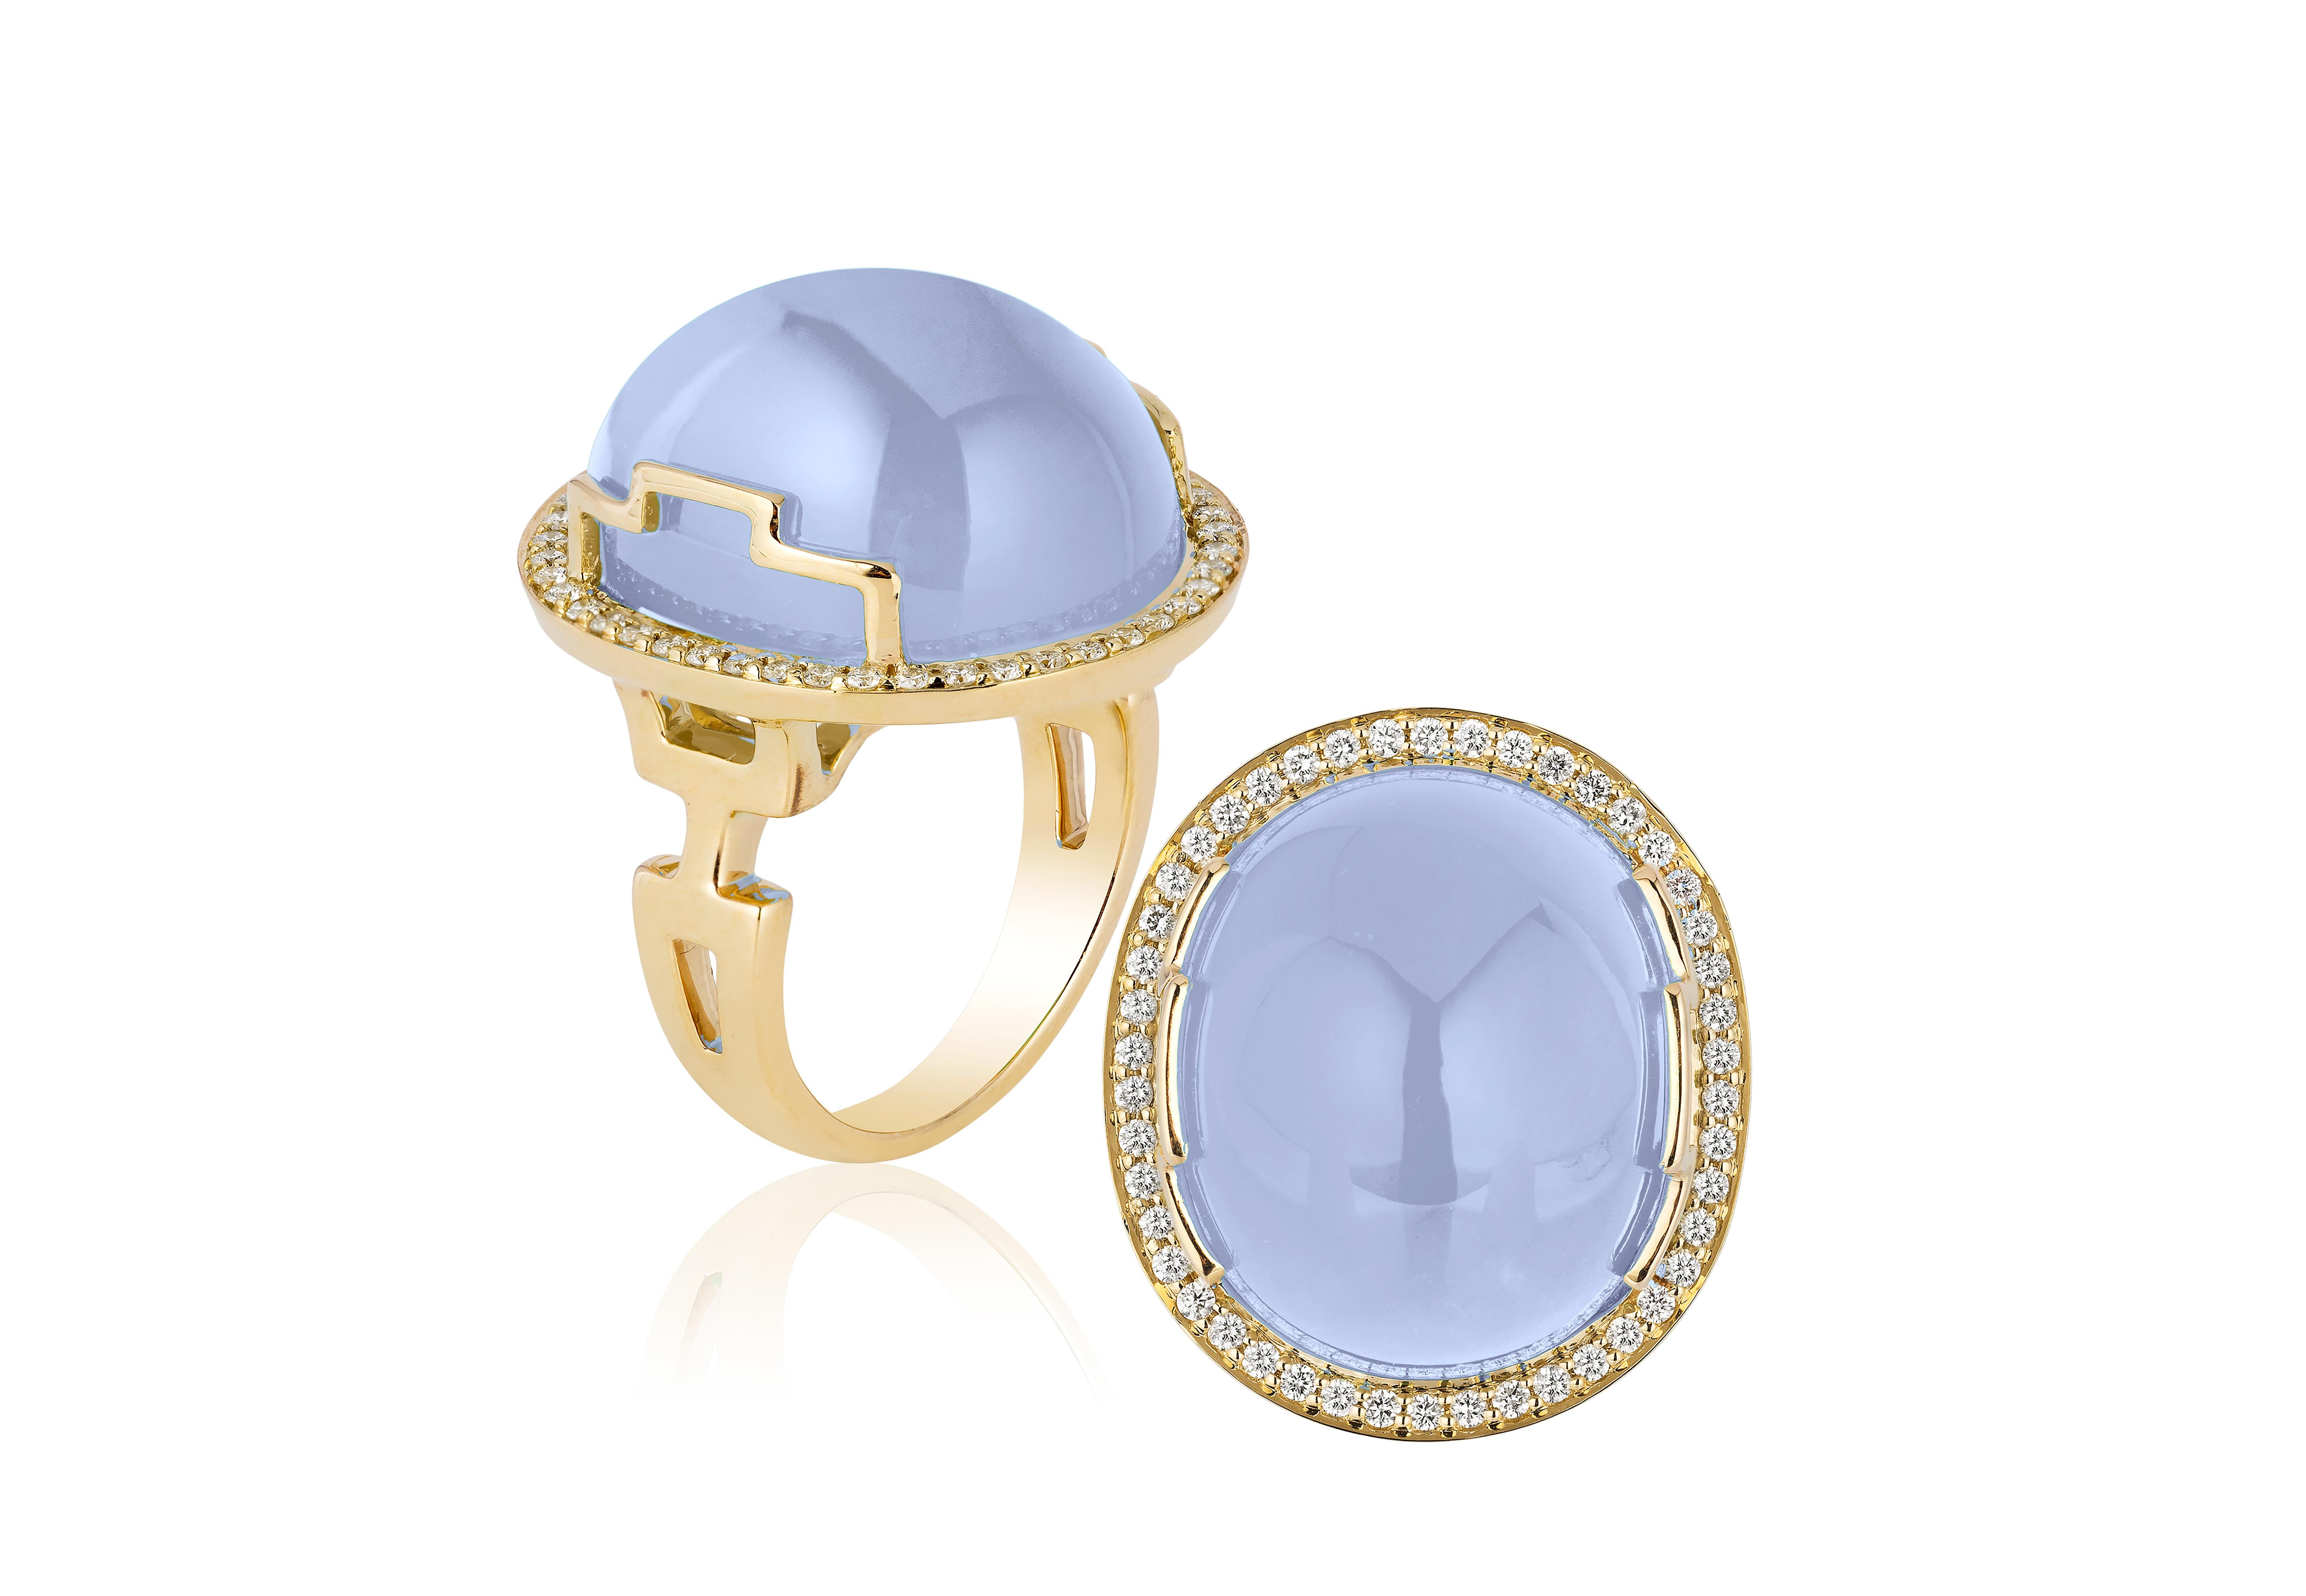 Blue Chalcedony Oval Cabochon Ring with Diamonds in 18k Yellow Gold, from 'Rock N Roll' Collection. Extensive collection of big and bold pieces. Like the music, this Rock ‘n Roll collection is electric in color and very stimulating to the eye. These